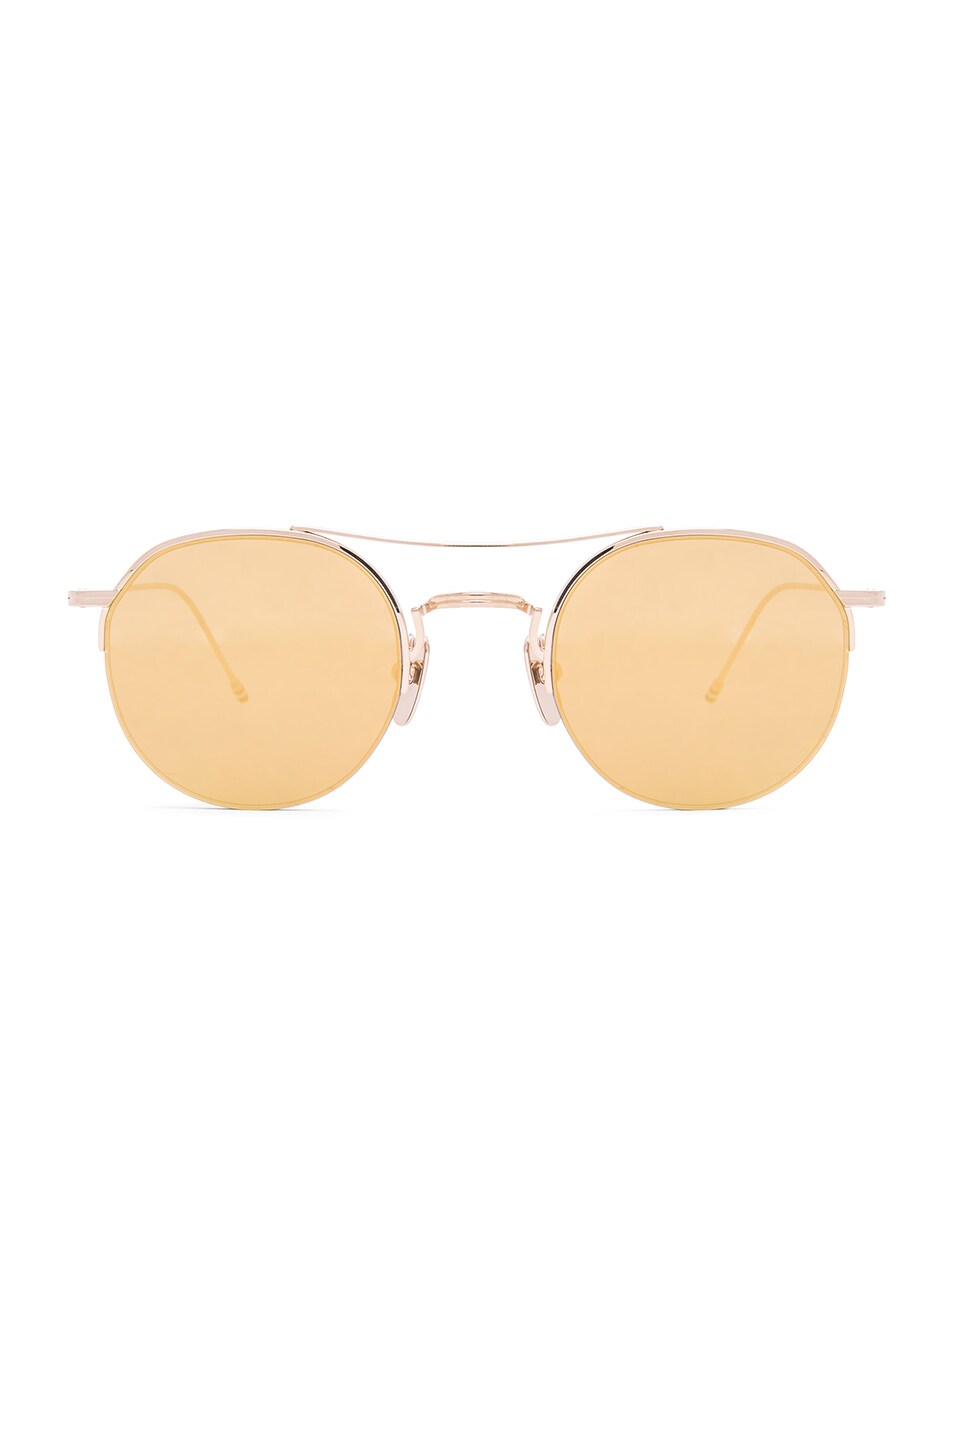 Image 1 of Thom Browne Round Brow Bar Sunglasses in Gold Mirror